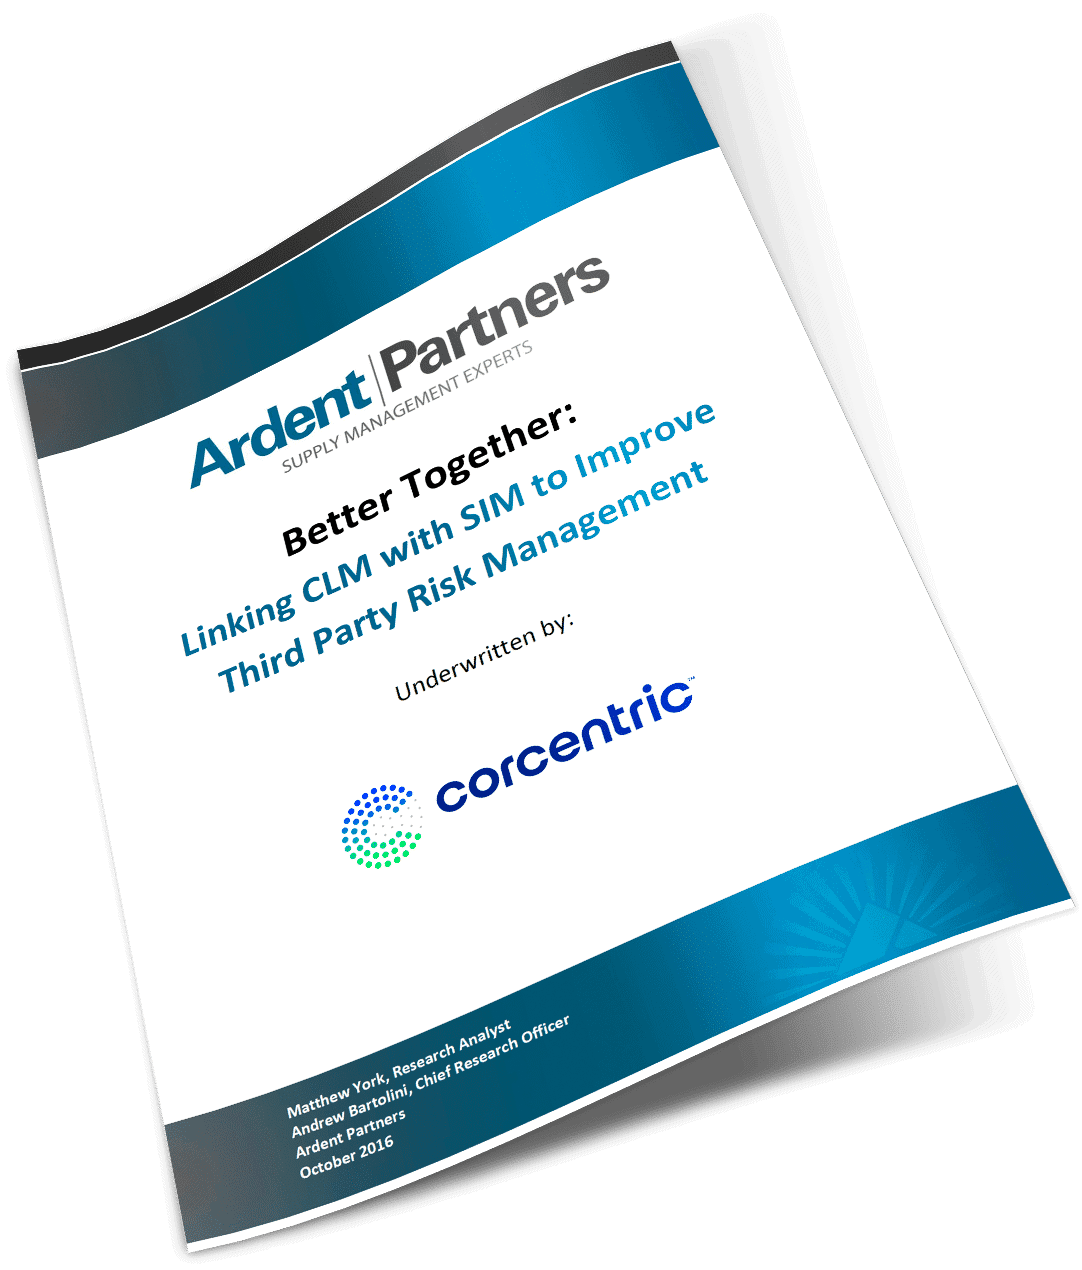 Ardent Partners: Linking CLM with SIM to Improve Third Party Risk Management